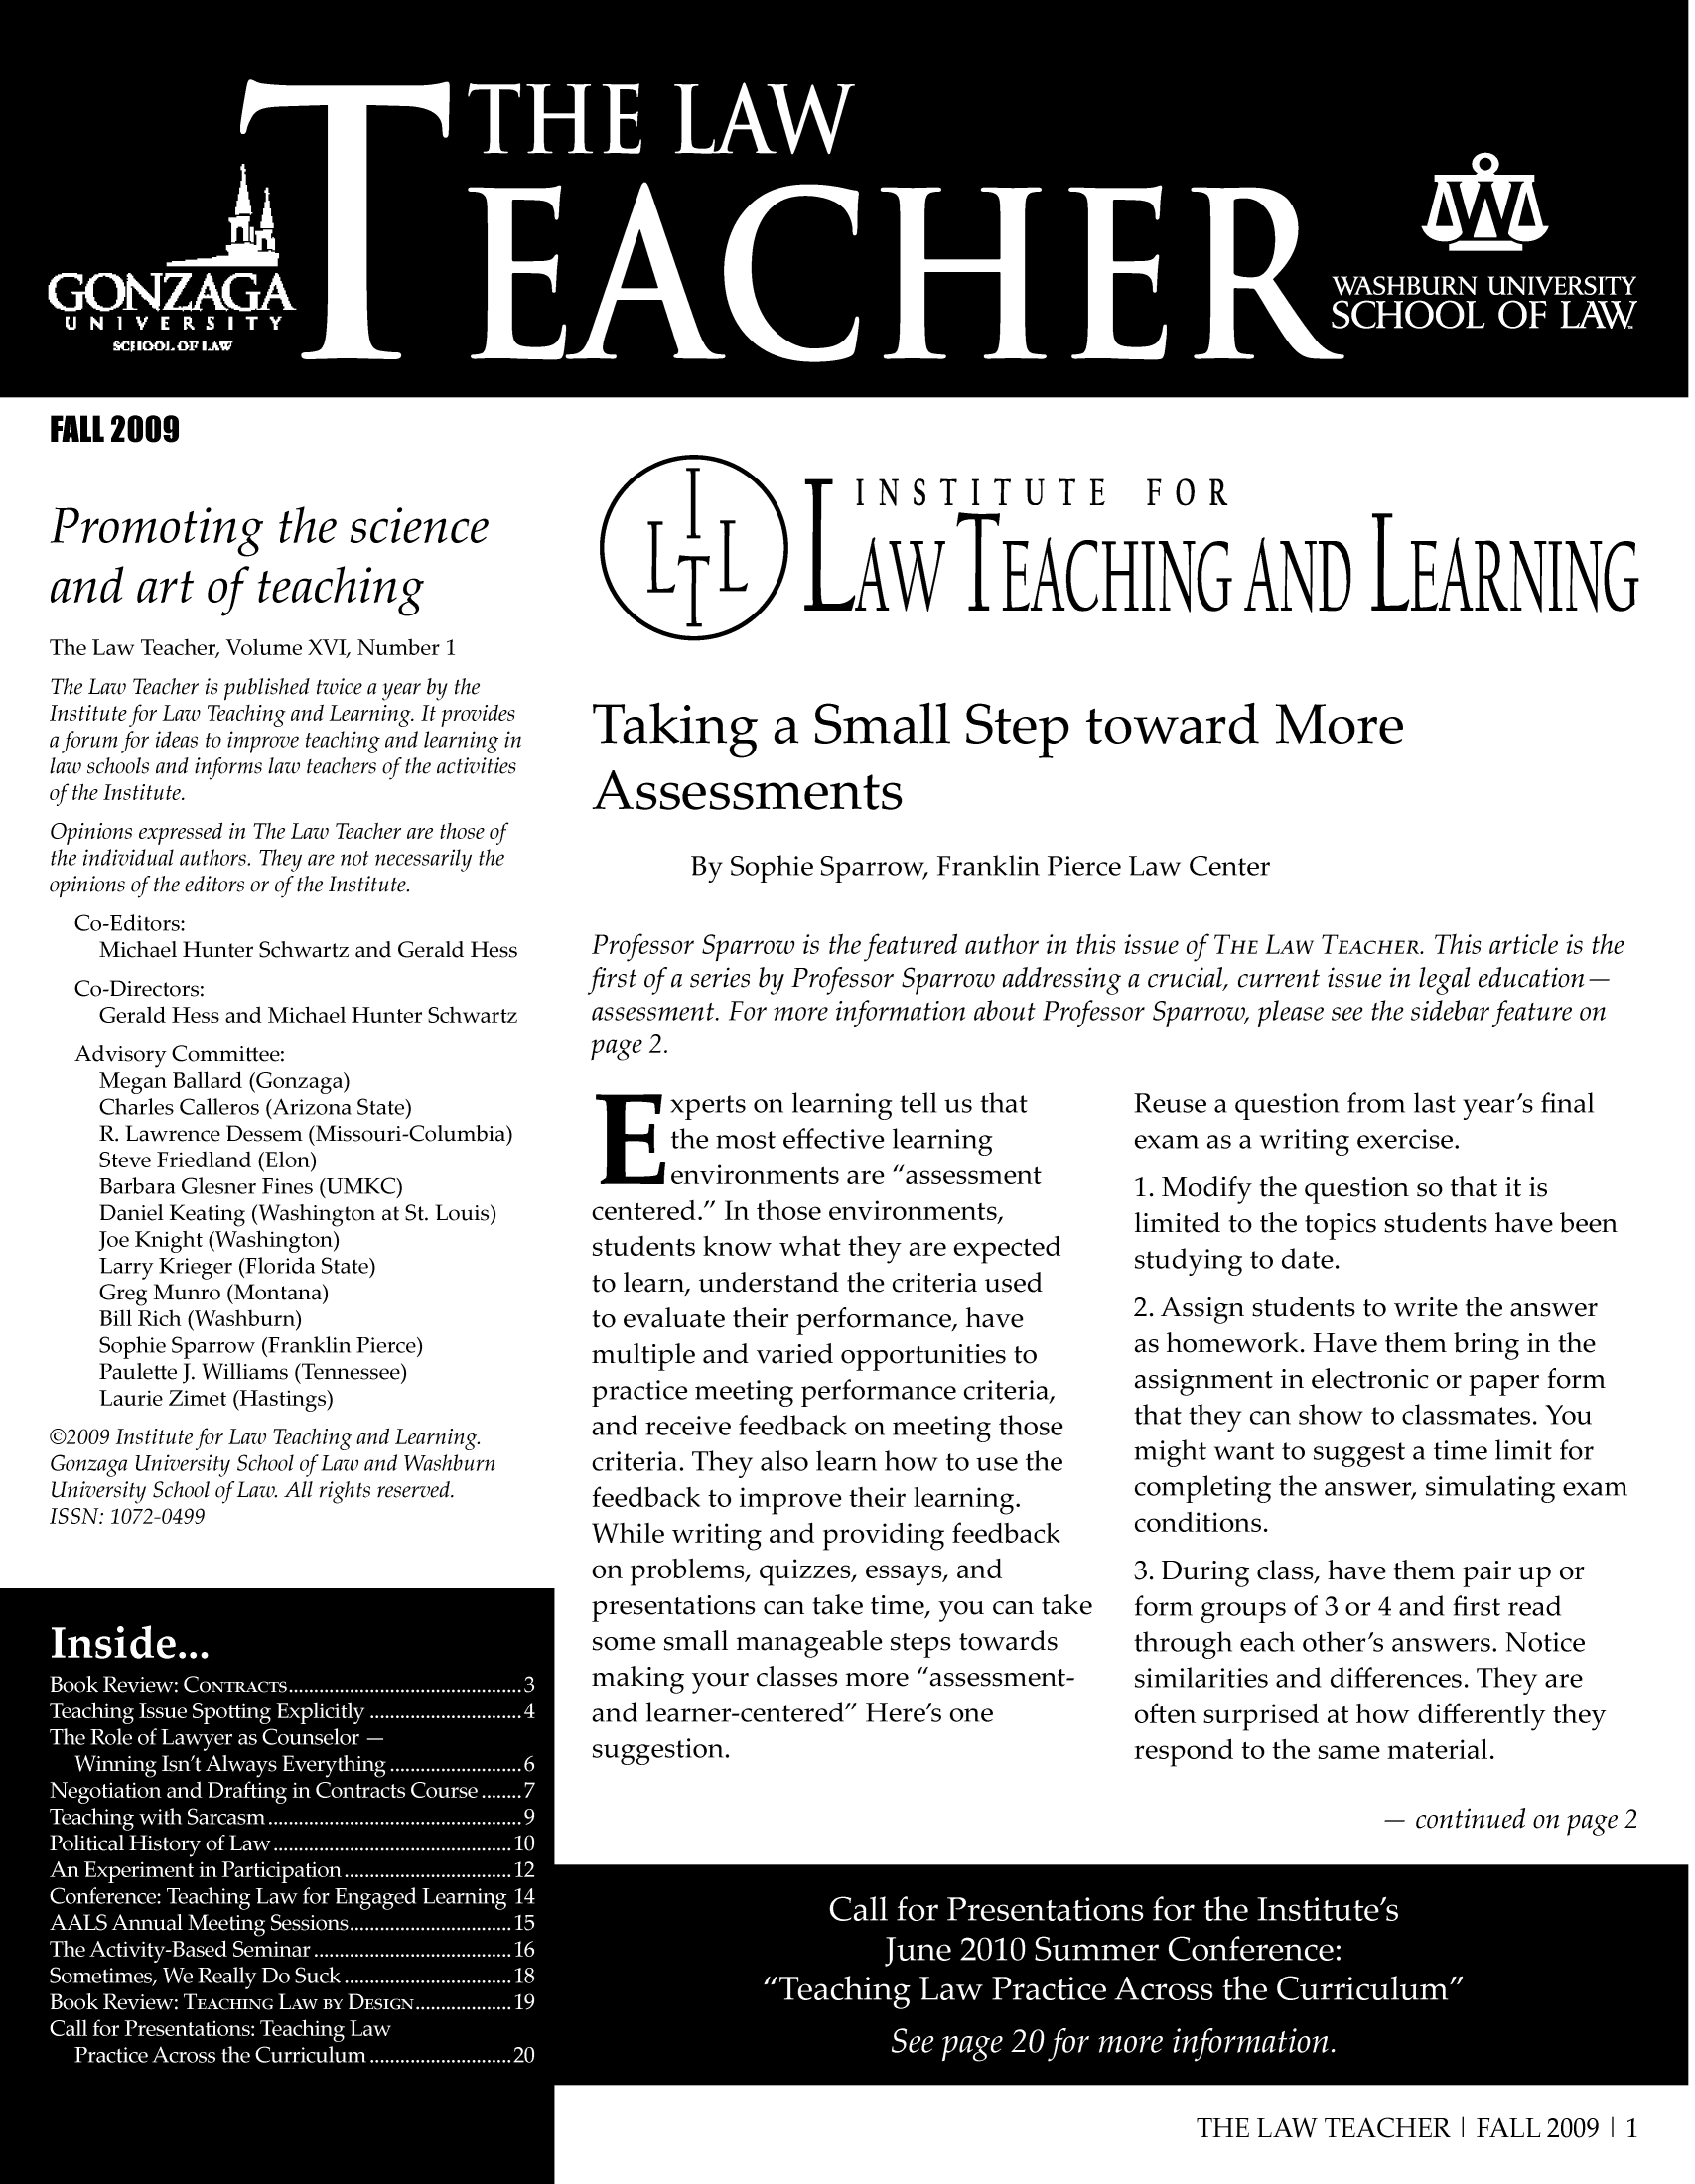 handle is hein.journals/lawteaer16 and id is 1 raw text is: FALL2009
Promoting the science
and art of teaching
The Law Teacher, Volume XVI, Number 1
The Law Teacher is published twice a year by the
Institute for Law Teaching and Learning. It provides
aforum for ideas to improve teaching and learning in
law schools and informs law teachers of the activities
of the Institute.
Opinions expressed in The Law Teacher are those of
the individual authors. They are not necessarily the
opinions of the editors or of the Institute.
Co-Editors:
Michael Hunter Schwartz and Gerald Hess
Co-Directors:
Gerald Hess and Michael Hunter Schwartz
Advisory Committee:
Megan Ballard (Gonzaga)
Charles Calleros (Arizona State)
R. Lawrence Dessem (Missouri-Columbia)
Steve Friedland (Elon)
Barbara Glesner Fines (UMKC)
Daniel Keating (Washington at St. Louis)
Joe Knight (Washington)
Larry Krieger (Florida State)
Greg Munro (Montana)
Bill Rich (Washburn)
Sophie Sparrow (Franklin Pierce)
Paulette J. Williams (Tennessee)
Laurie Zimet (Hastings)
@2009 Institute for Law Teaching and Learning.
Gonzaga University School of Law and Washburn
University School of Law. All rights reserved.
ISSN: 1072-0499

I            INSTITUTE              FOR
LT L LAw TEACHILN G AN.D LEARLN INL.G
Taking a Small Step toward More
Assessments
By Sophie Sparrow, Franklin Pierce Law Center
Professor Sparrow is the featured author in this issue of THE LAW TEACHER. This article is the
first of a series by Professor Sparrow addressing a crucial, current issue in legal education-
assessment. For more information about Professor Sparrow, please see the sidebar feature on
page 2.

Experts on learning tell us that
the most effective learning
environments are assessment
centered. In those environments,
students know what they are expected
to learn, understand the criteria used
to evaluate their performance, have
multiple and varied opportunities to
practice meeting performance criteria,
and receive feedback on meeting those
criteria. They also learn how to use the
feedback to improve their learning.
While writing and providing feedback
on problems, quizzes, essays, and

Reuse a question from last year's final
exam as a writing exercise.
1. Modify the question so that it is
limited to the topics students have been
studying to date.
2. Assign students to write the answer
as homework. Have them bring in the
assignment in electronic or paper form
that they can show to classmates. You
might want to suggest a time limit for
completing the answer, simulating exam
conditions.
3. During class, have them pair up or

**nsi*e..*.  *   .  *
Techn                       making yourin  classestl  more.............  assset  siiarte  an  difrne.Te r
and lernr-enerd Hee' oneye                            ofte surprised athwdfeetyte
*   * *S
presentationsngLawfoEd on tae t o u can2tak
mkn                   your classes more assessmen-.. . 1
The ~ ~ ~ ~ ~ ~ ~ ~ ~ ~ n  learner-centered  Here'sr o...................6J ne0 0S m e Co frn :
siilriie                                               ad  iferncs.Thy  r
Cal f r P es nttio s:Techig  aw   eep a e  2 fo  m respnod tonesa em te i l
THEctice  LAWiue dAH  I FAL 2009 2
THE LAW TEACHER IFAL20|1


